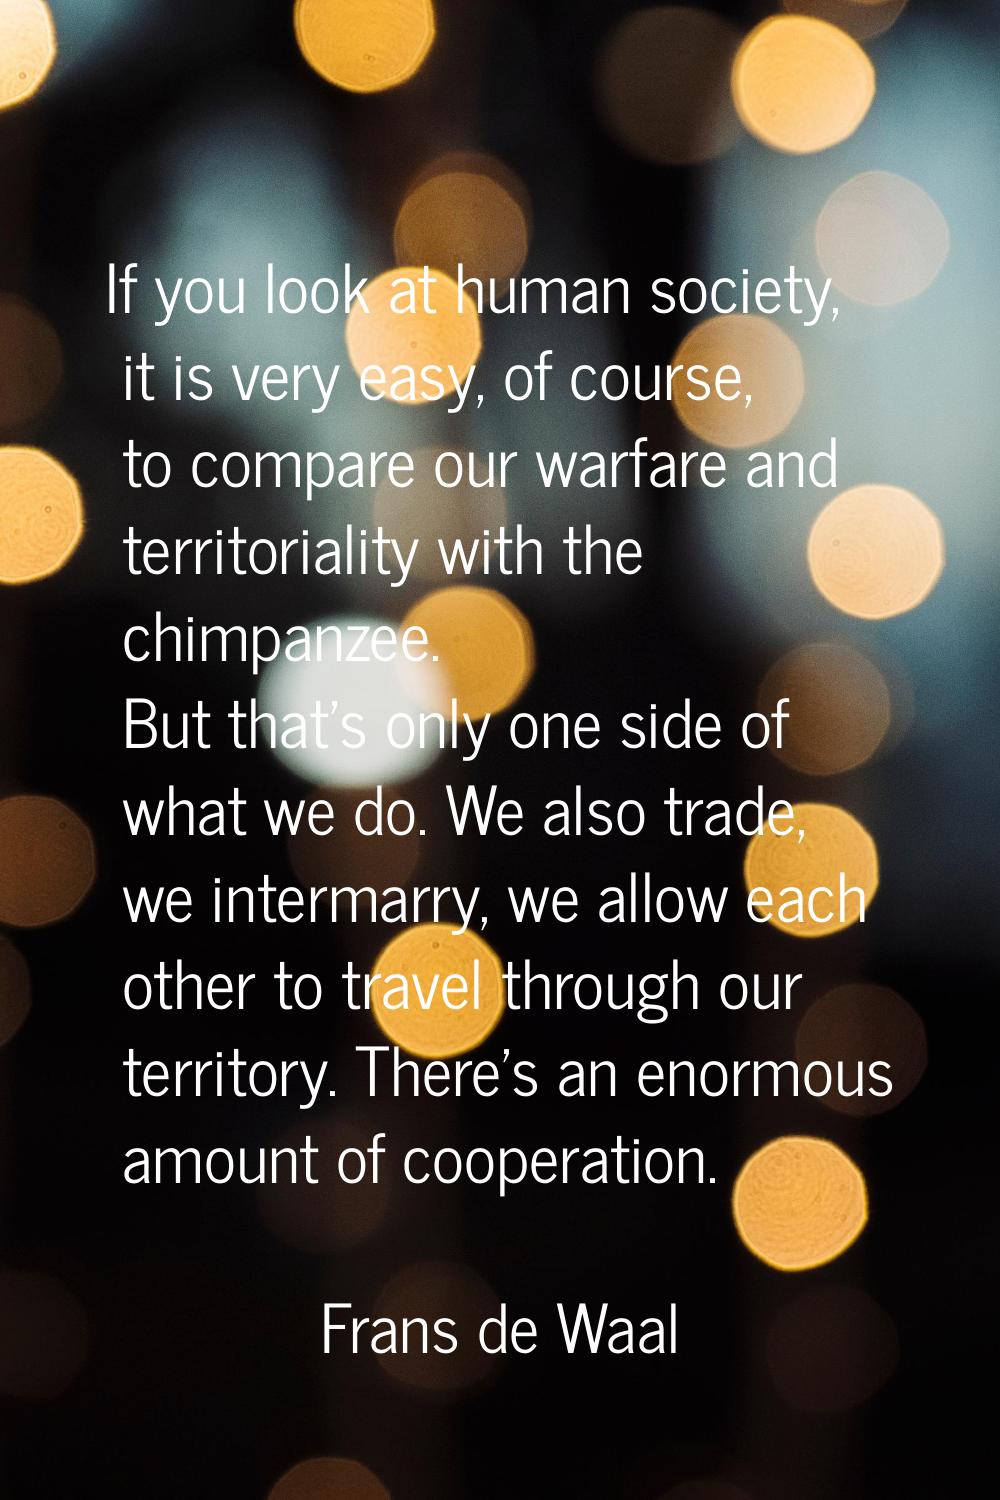 If you look at human society, it is very easy, of course, to compare our warfare and territoriality